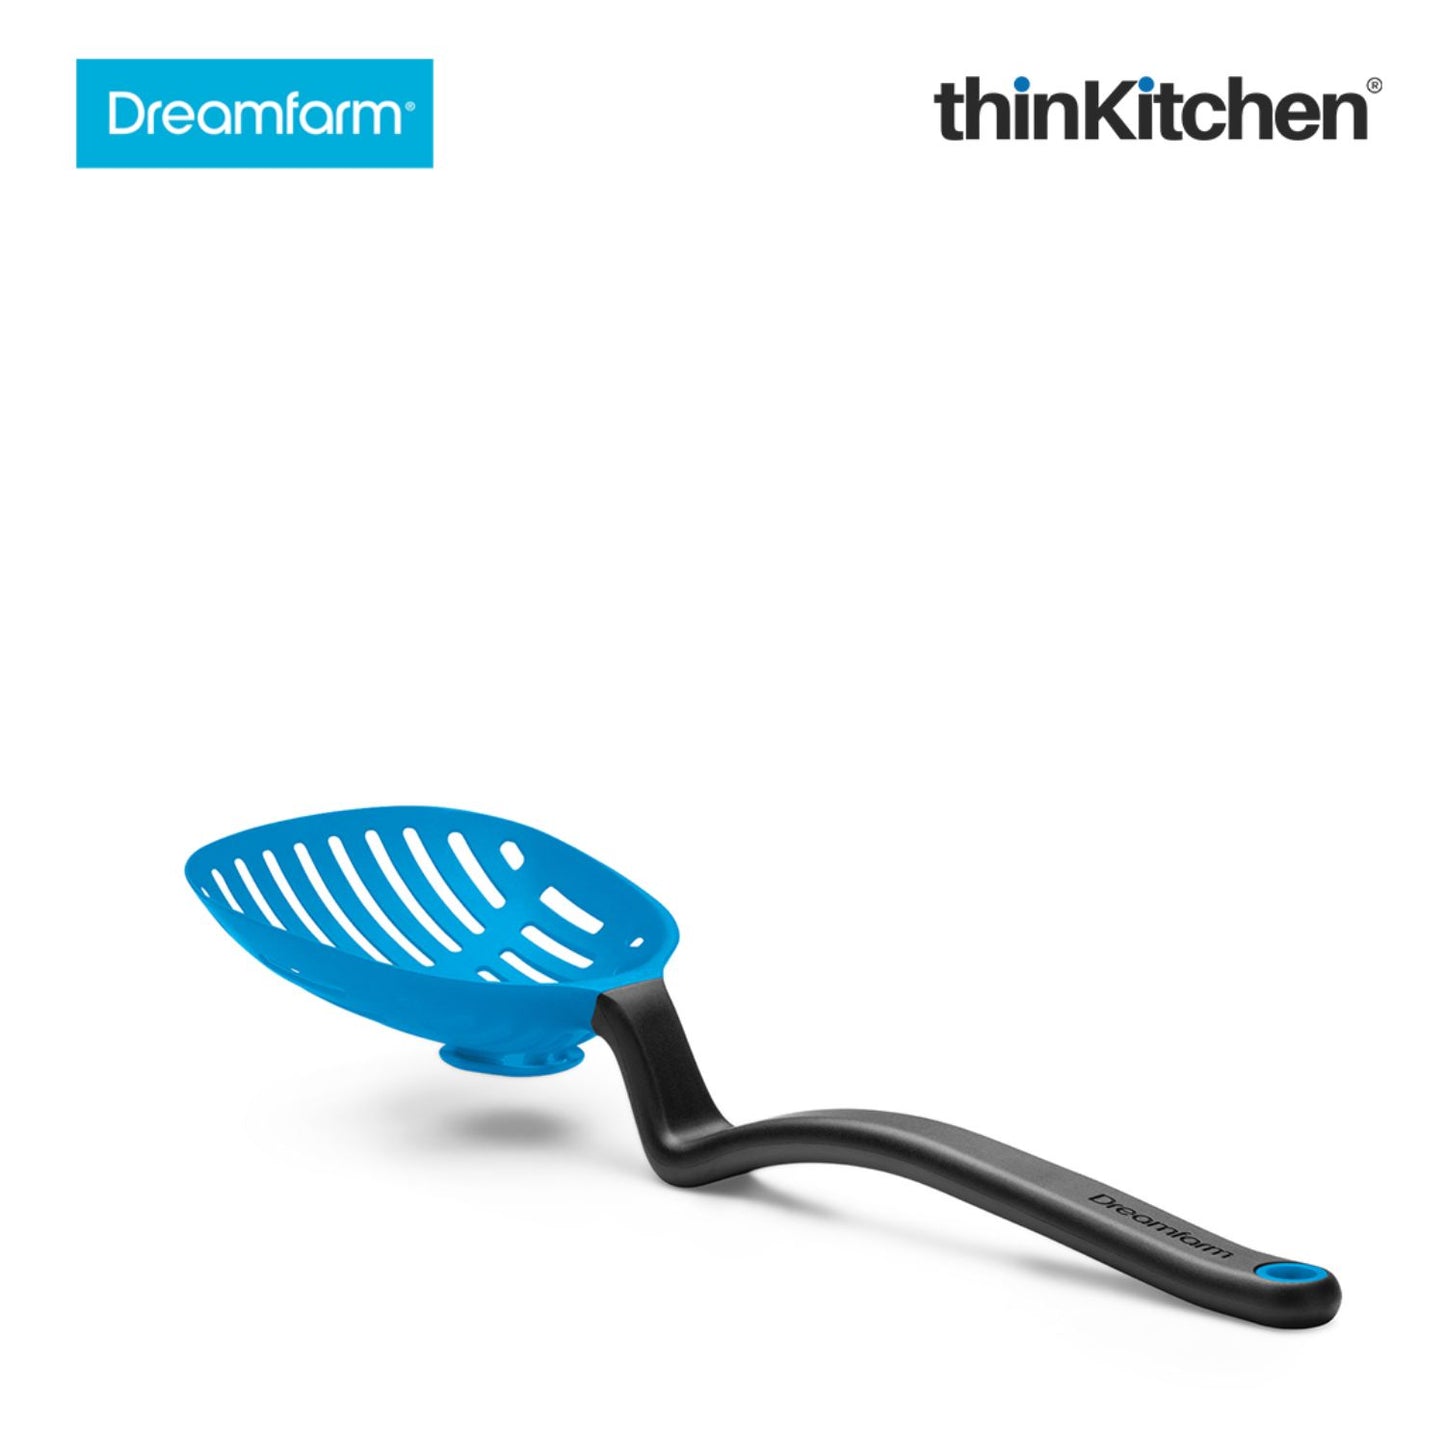 Dreamfarm Lestrain Drip Catching Sit Up Scoop Strainer Keeps Bench Tops Mess Free Flexible Dripless Slotted Spoon Food Strainer Blue